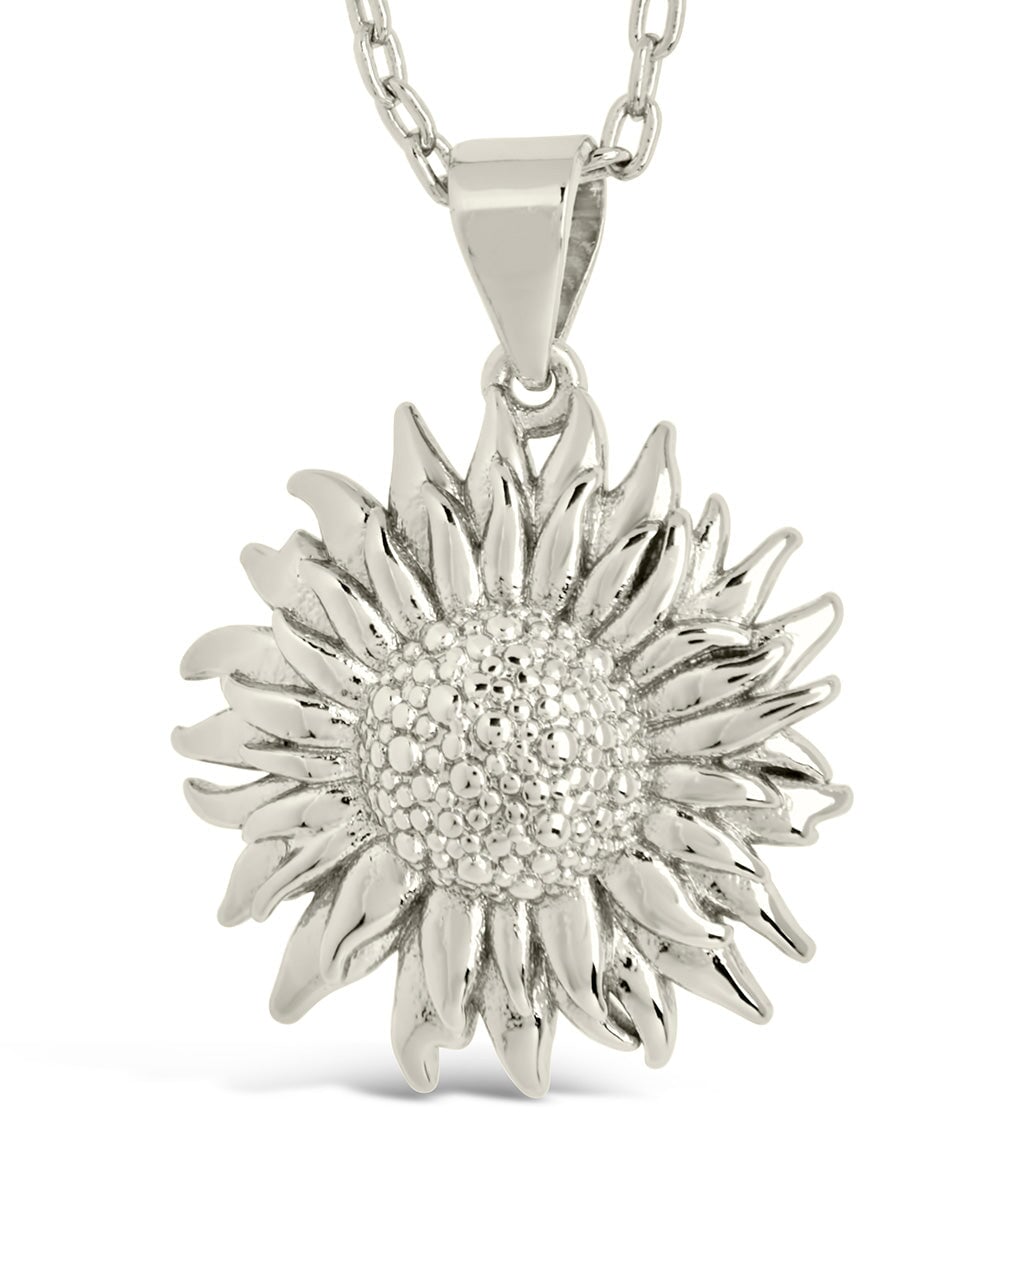 Solaris Sunflower Pendant Necklace Necklace Sterling Forever Silver 